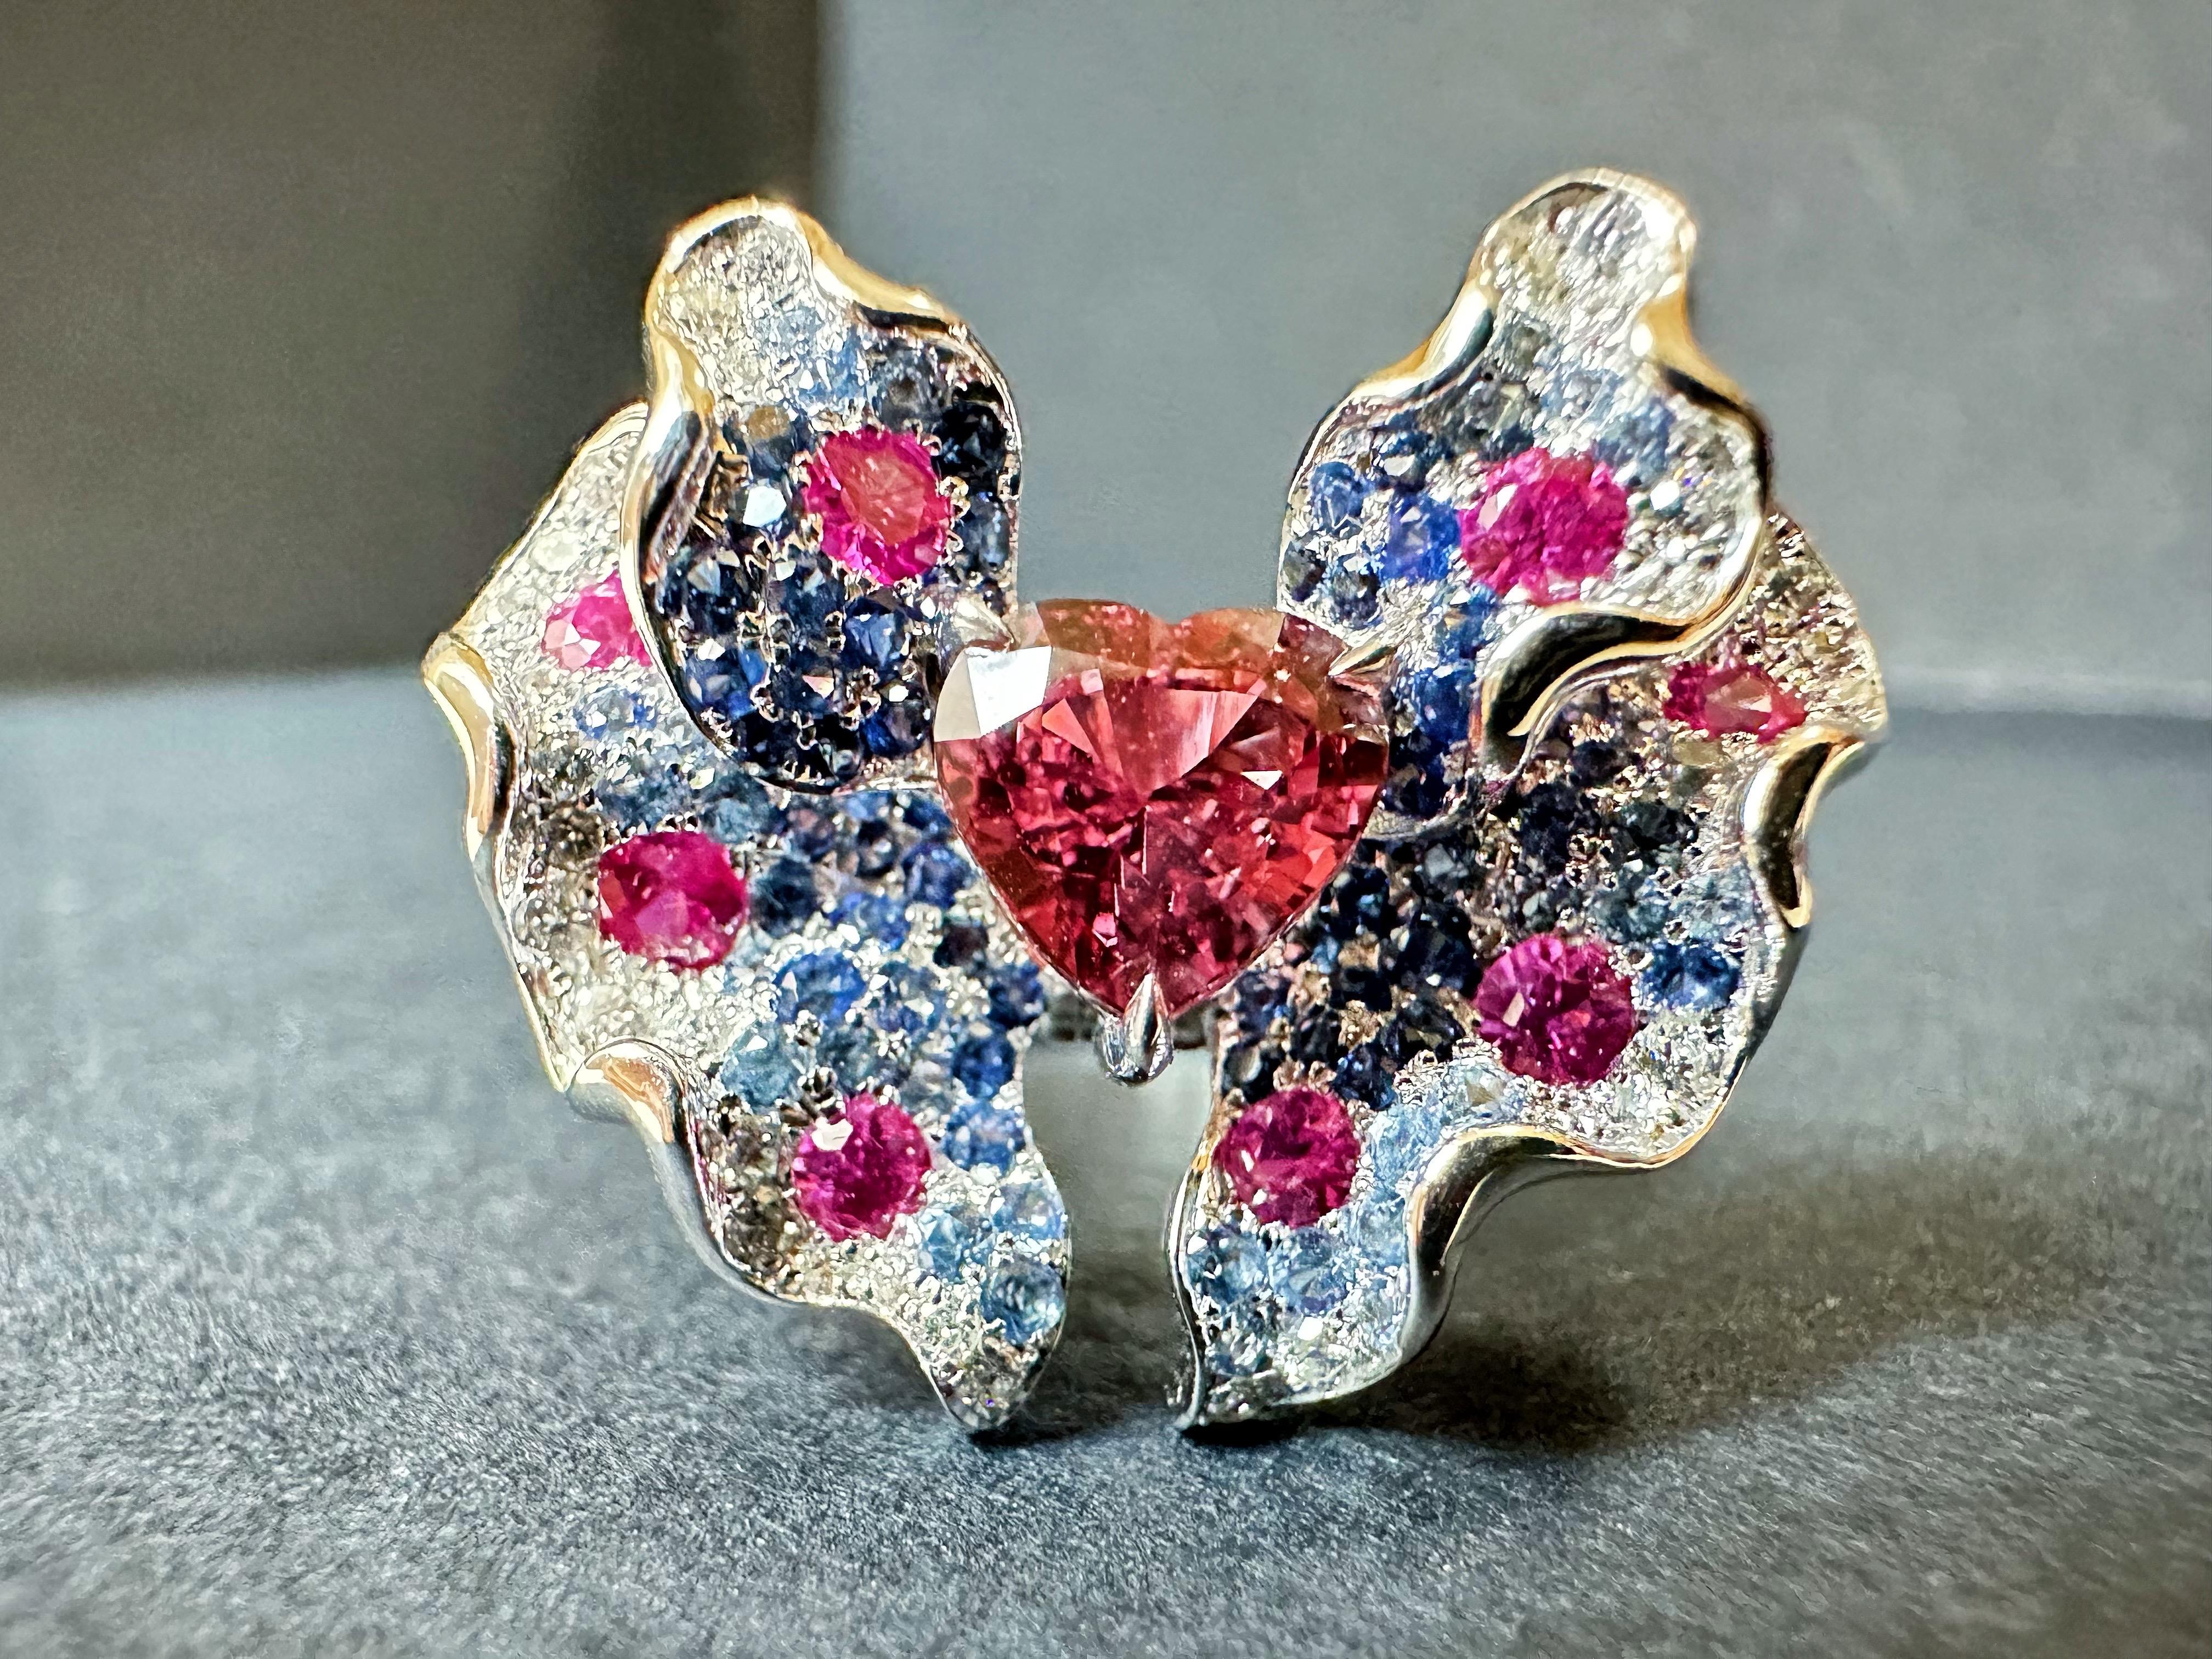 Immerse yourself in timeless elegance with our exquisite diamond pendant cum ring featuring a breathtaking orangish pink padparadscha sapphire in a butterfly design. This one-of-a-kind art piece is expertly handcrafted in 18K white gold, adorned